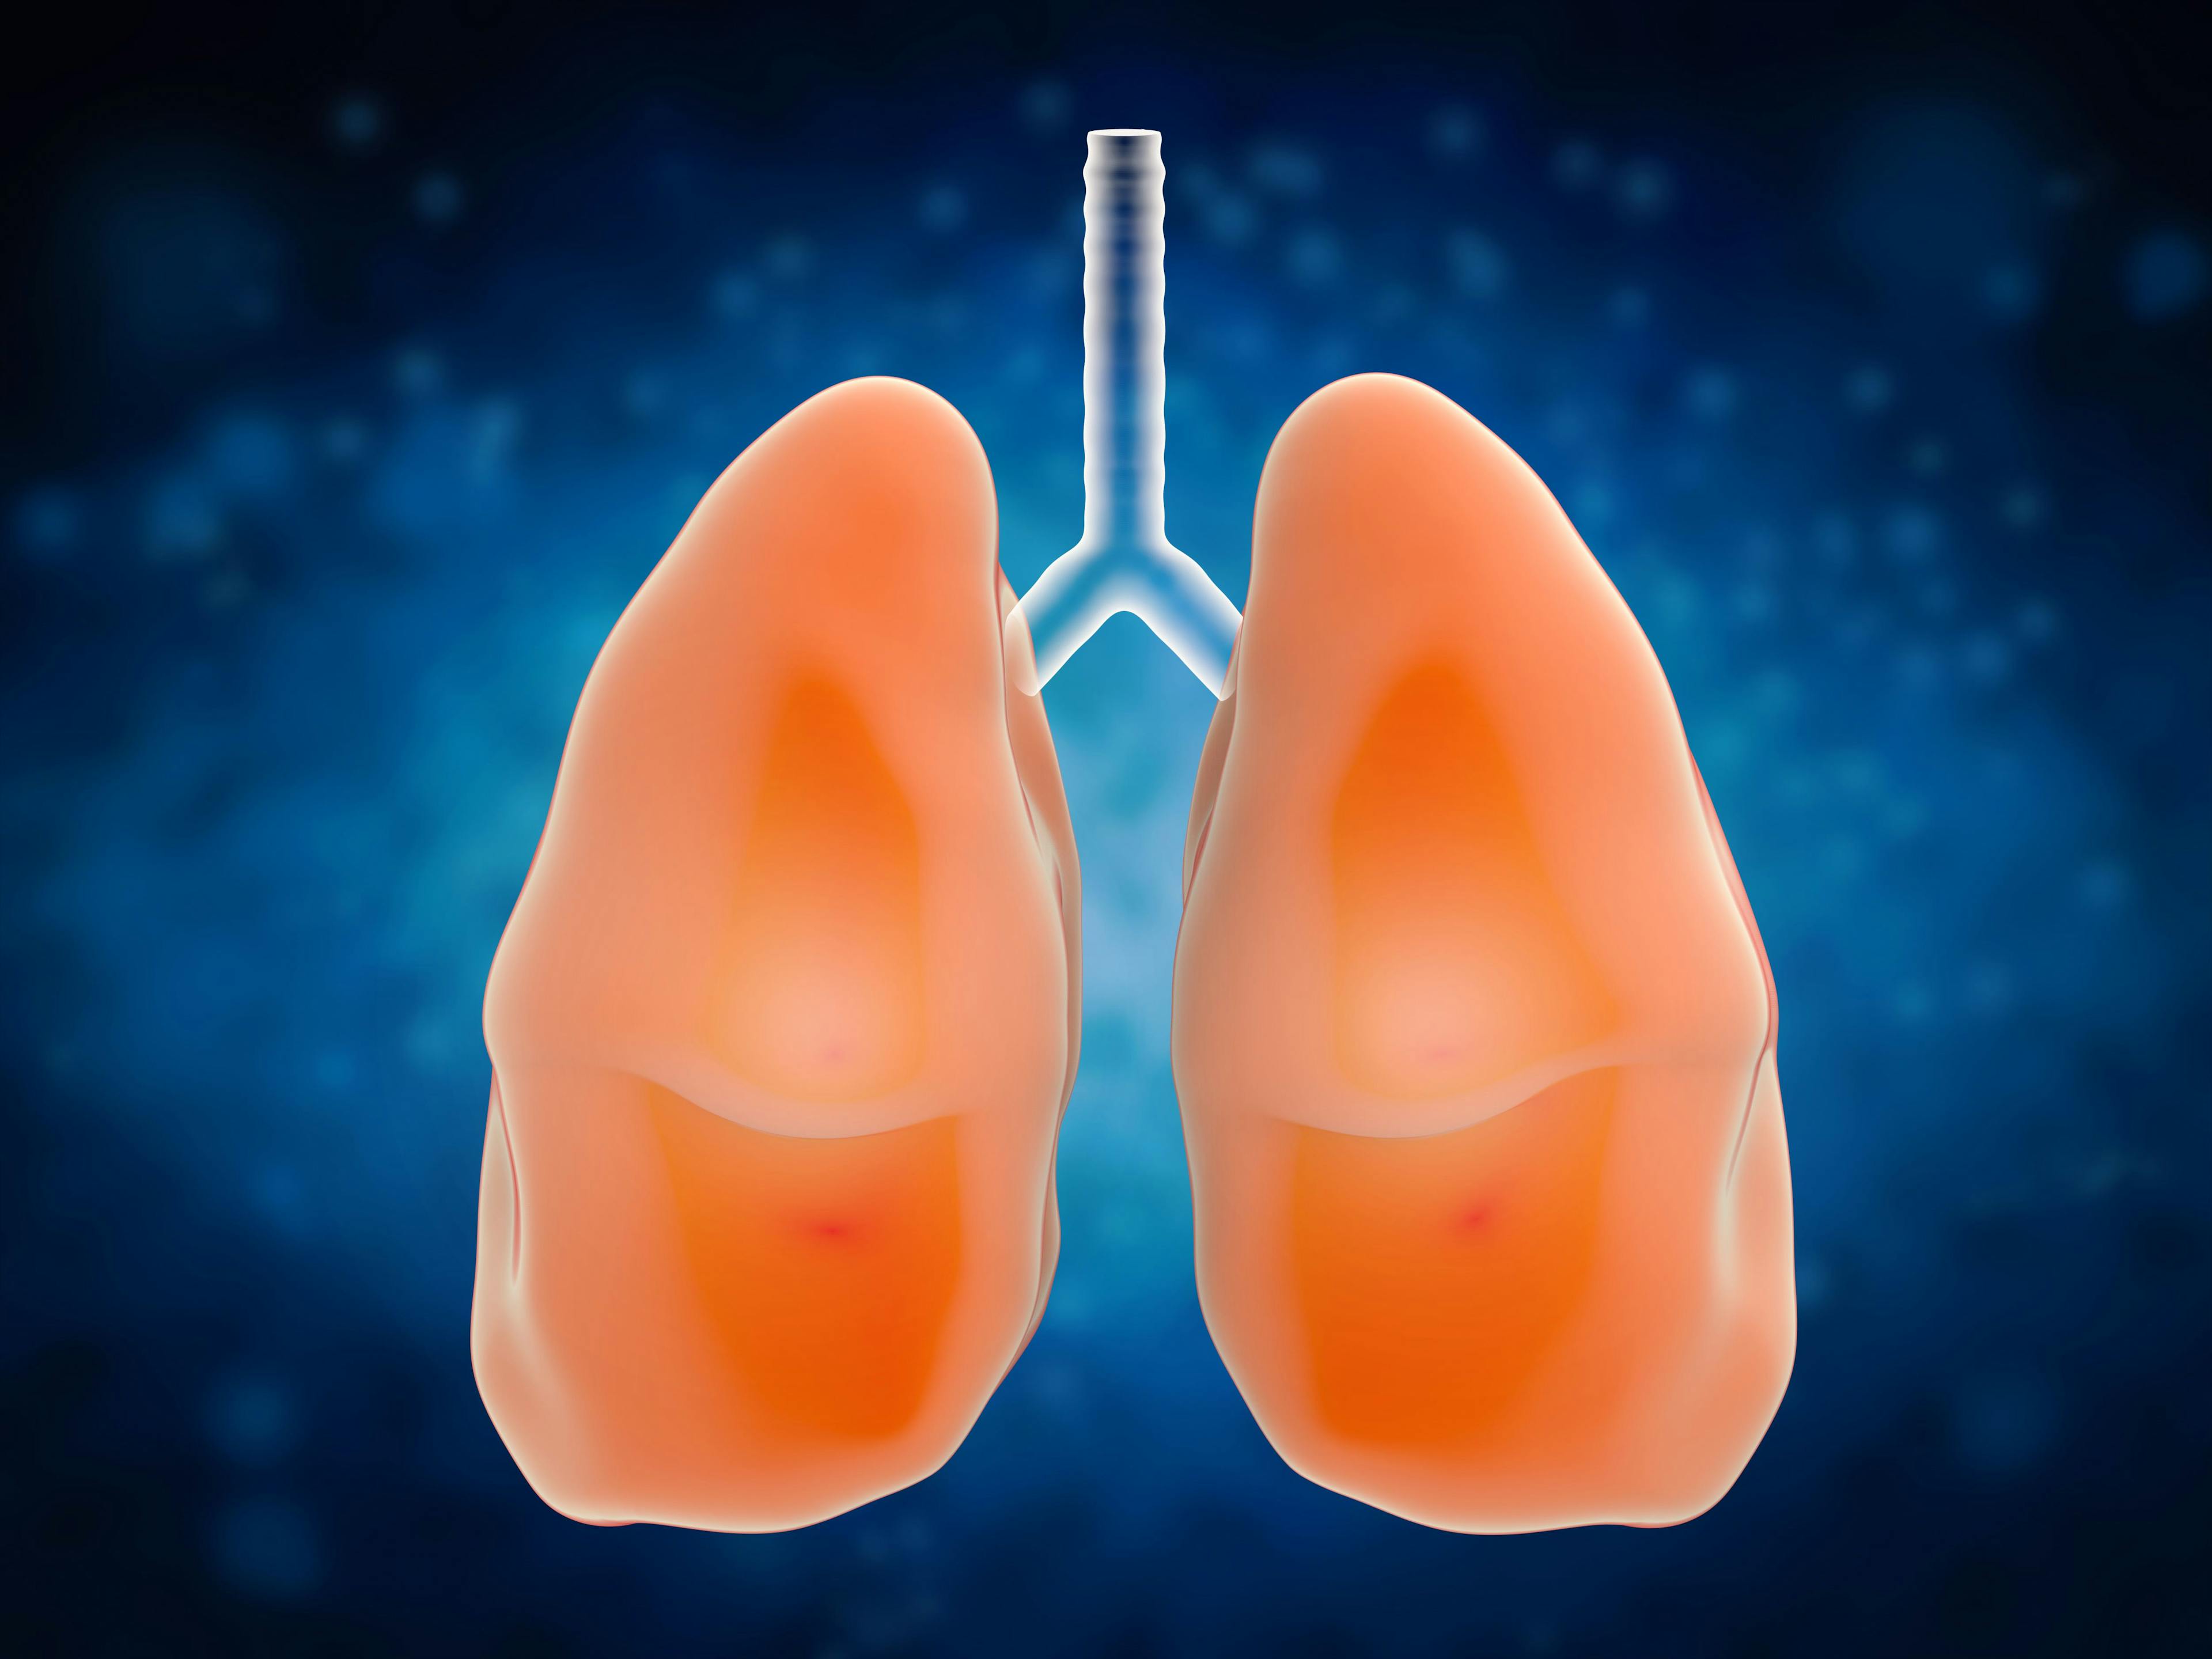 Investigators will present overall survival and objective response data from the phase 3 MARIPOSA-2 trial assessing amivantamab in EGFR exon 19 deletion–positive non–small cell lung cancer at a future scientific meeting.